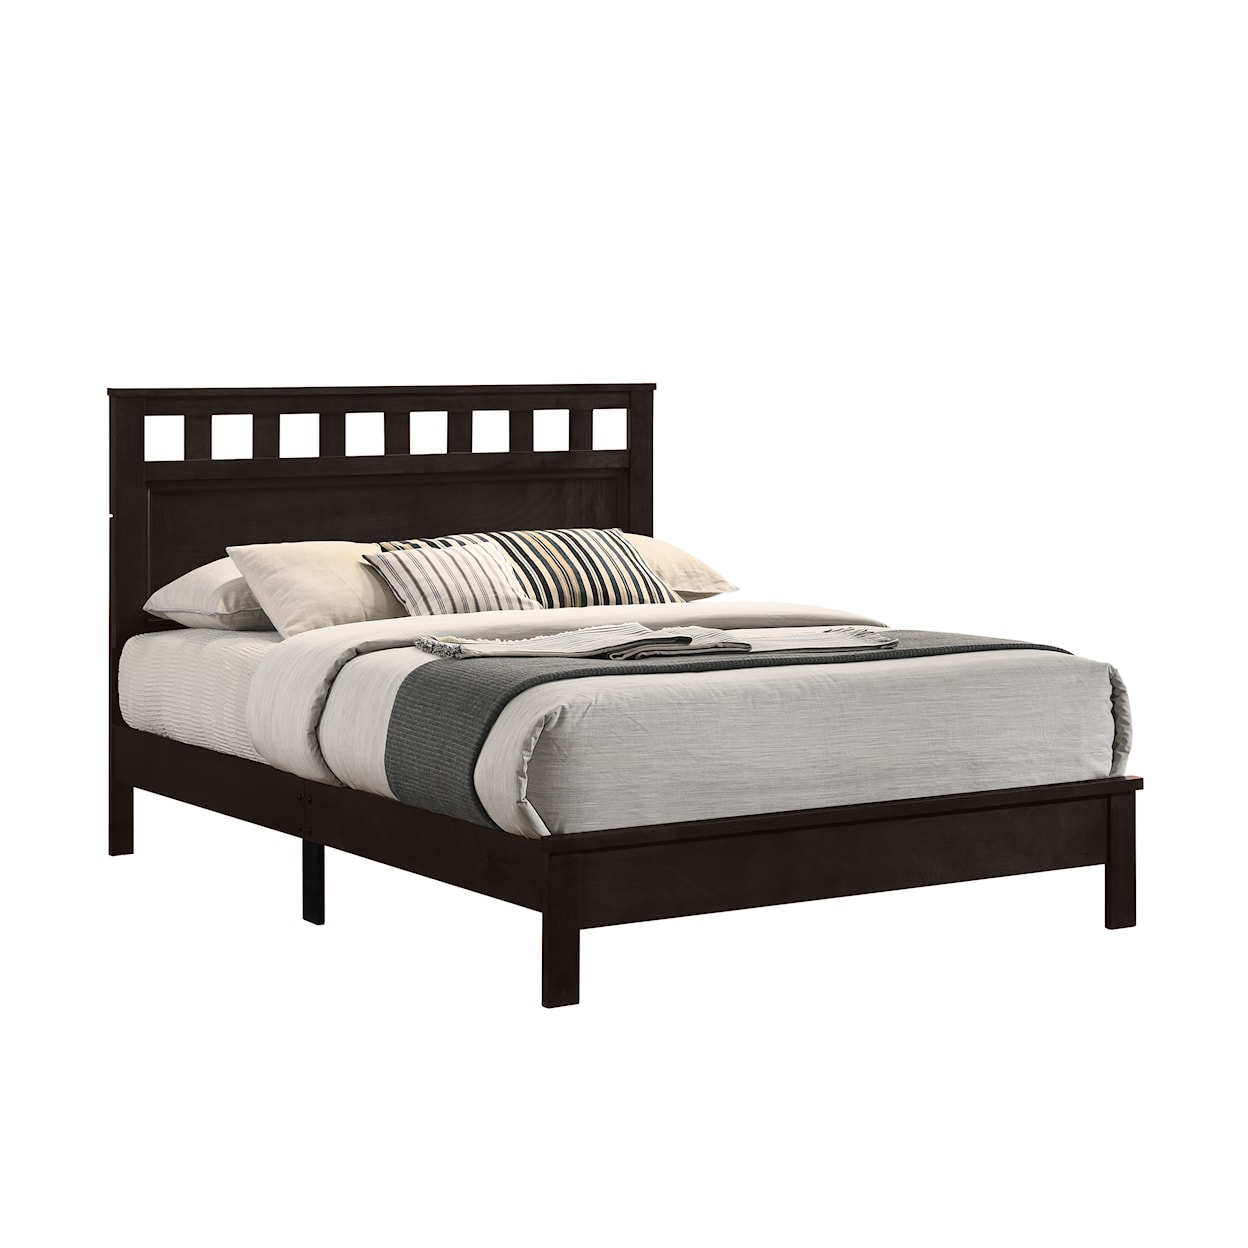 New Classic Pisces Full Bed in a Box